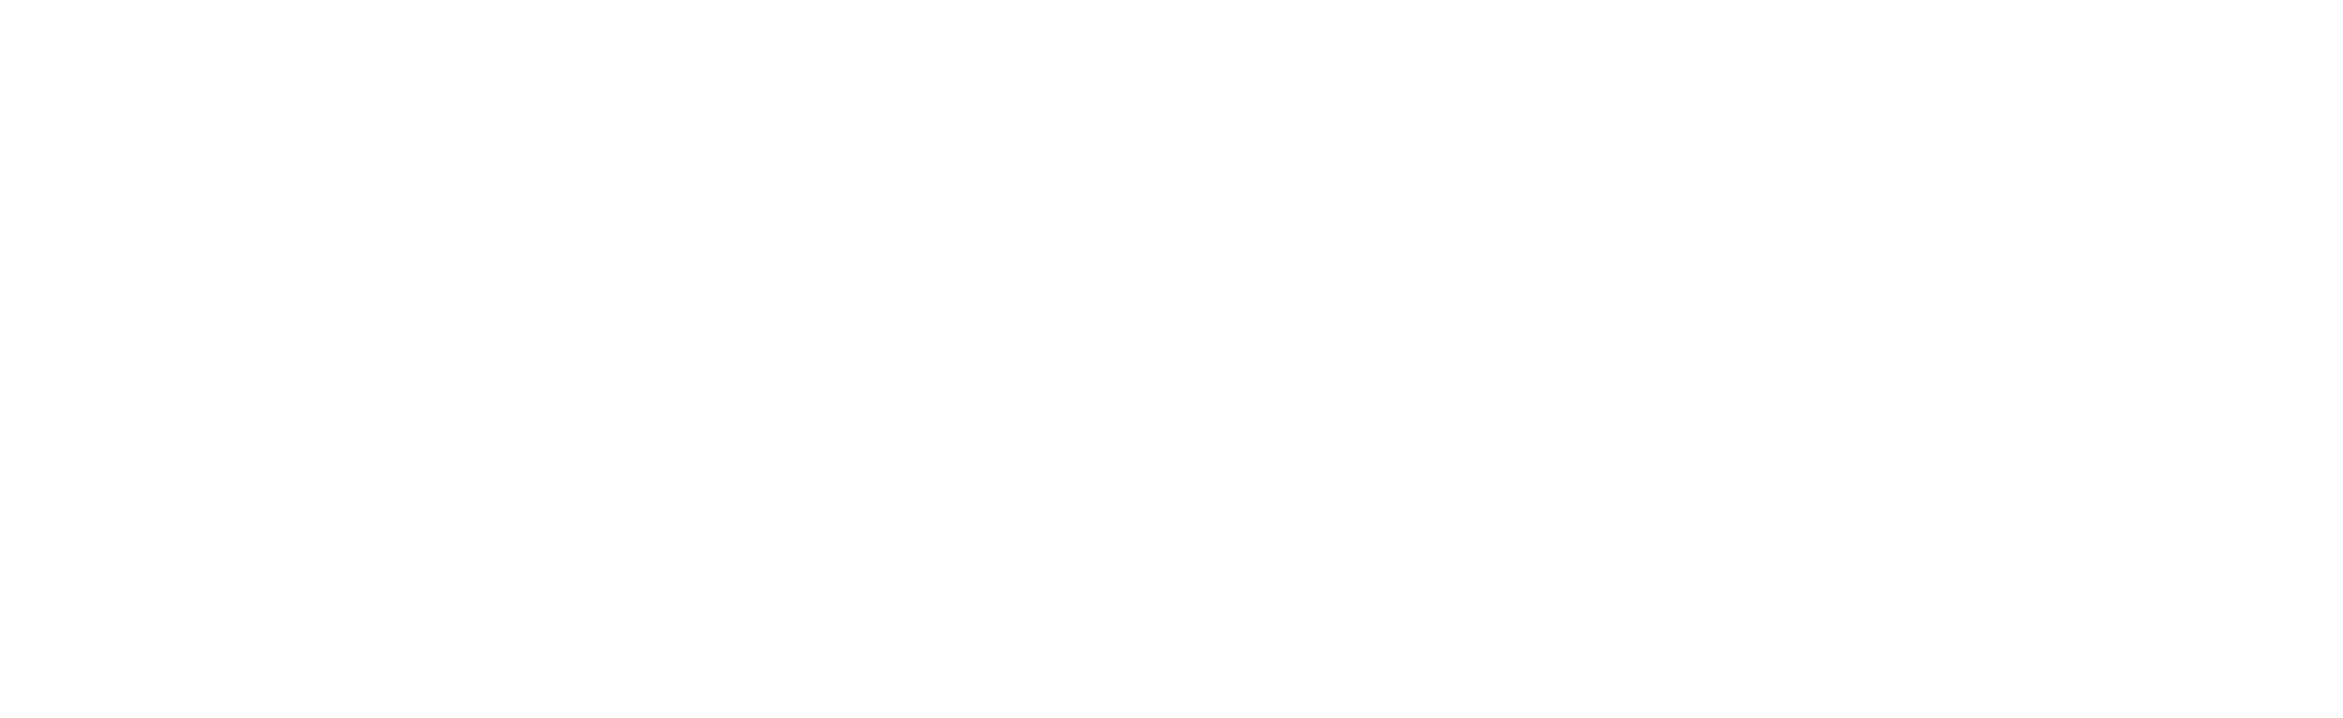 Live for the Metal